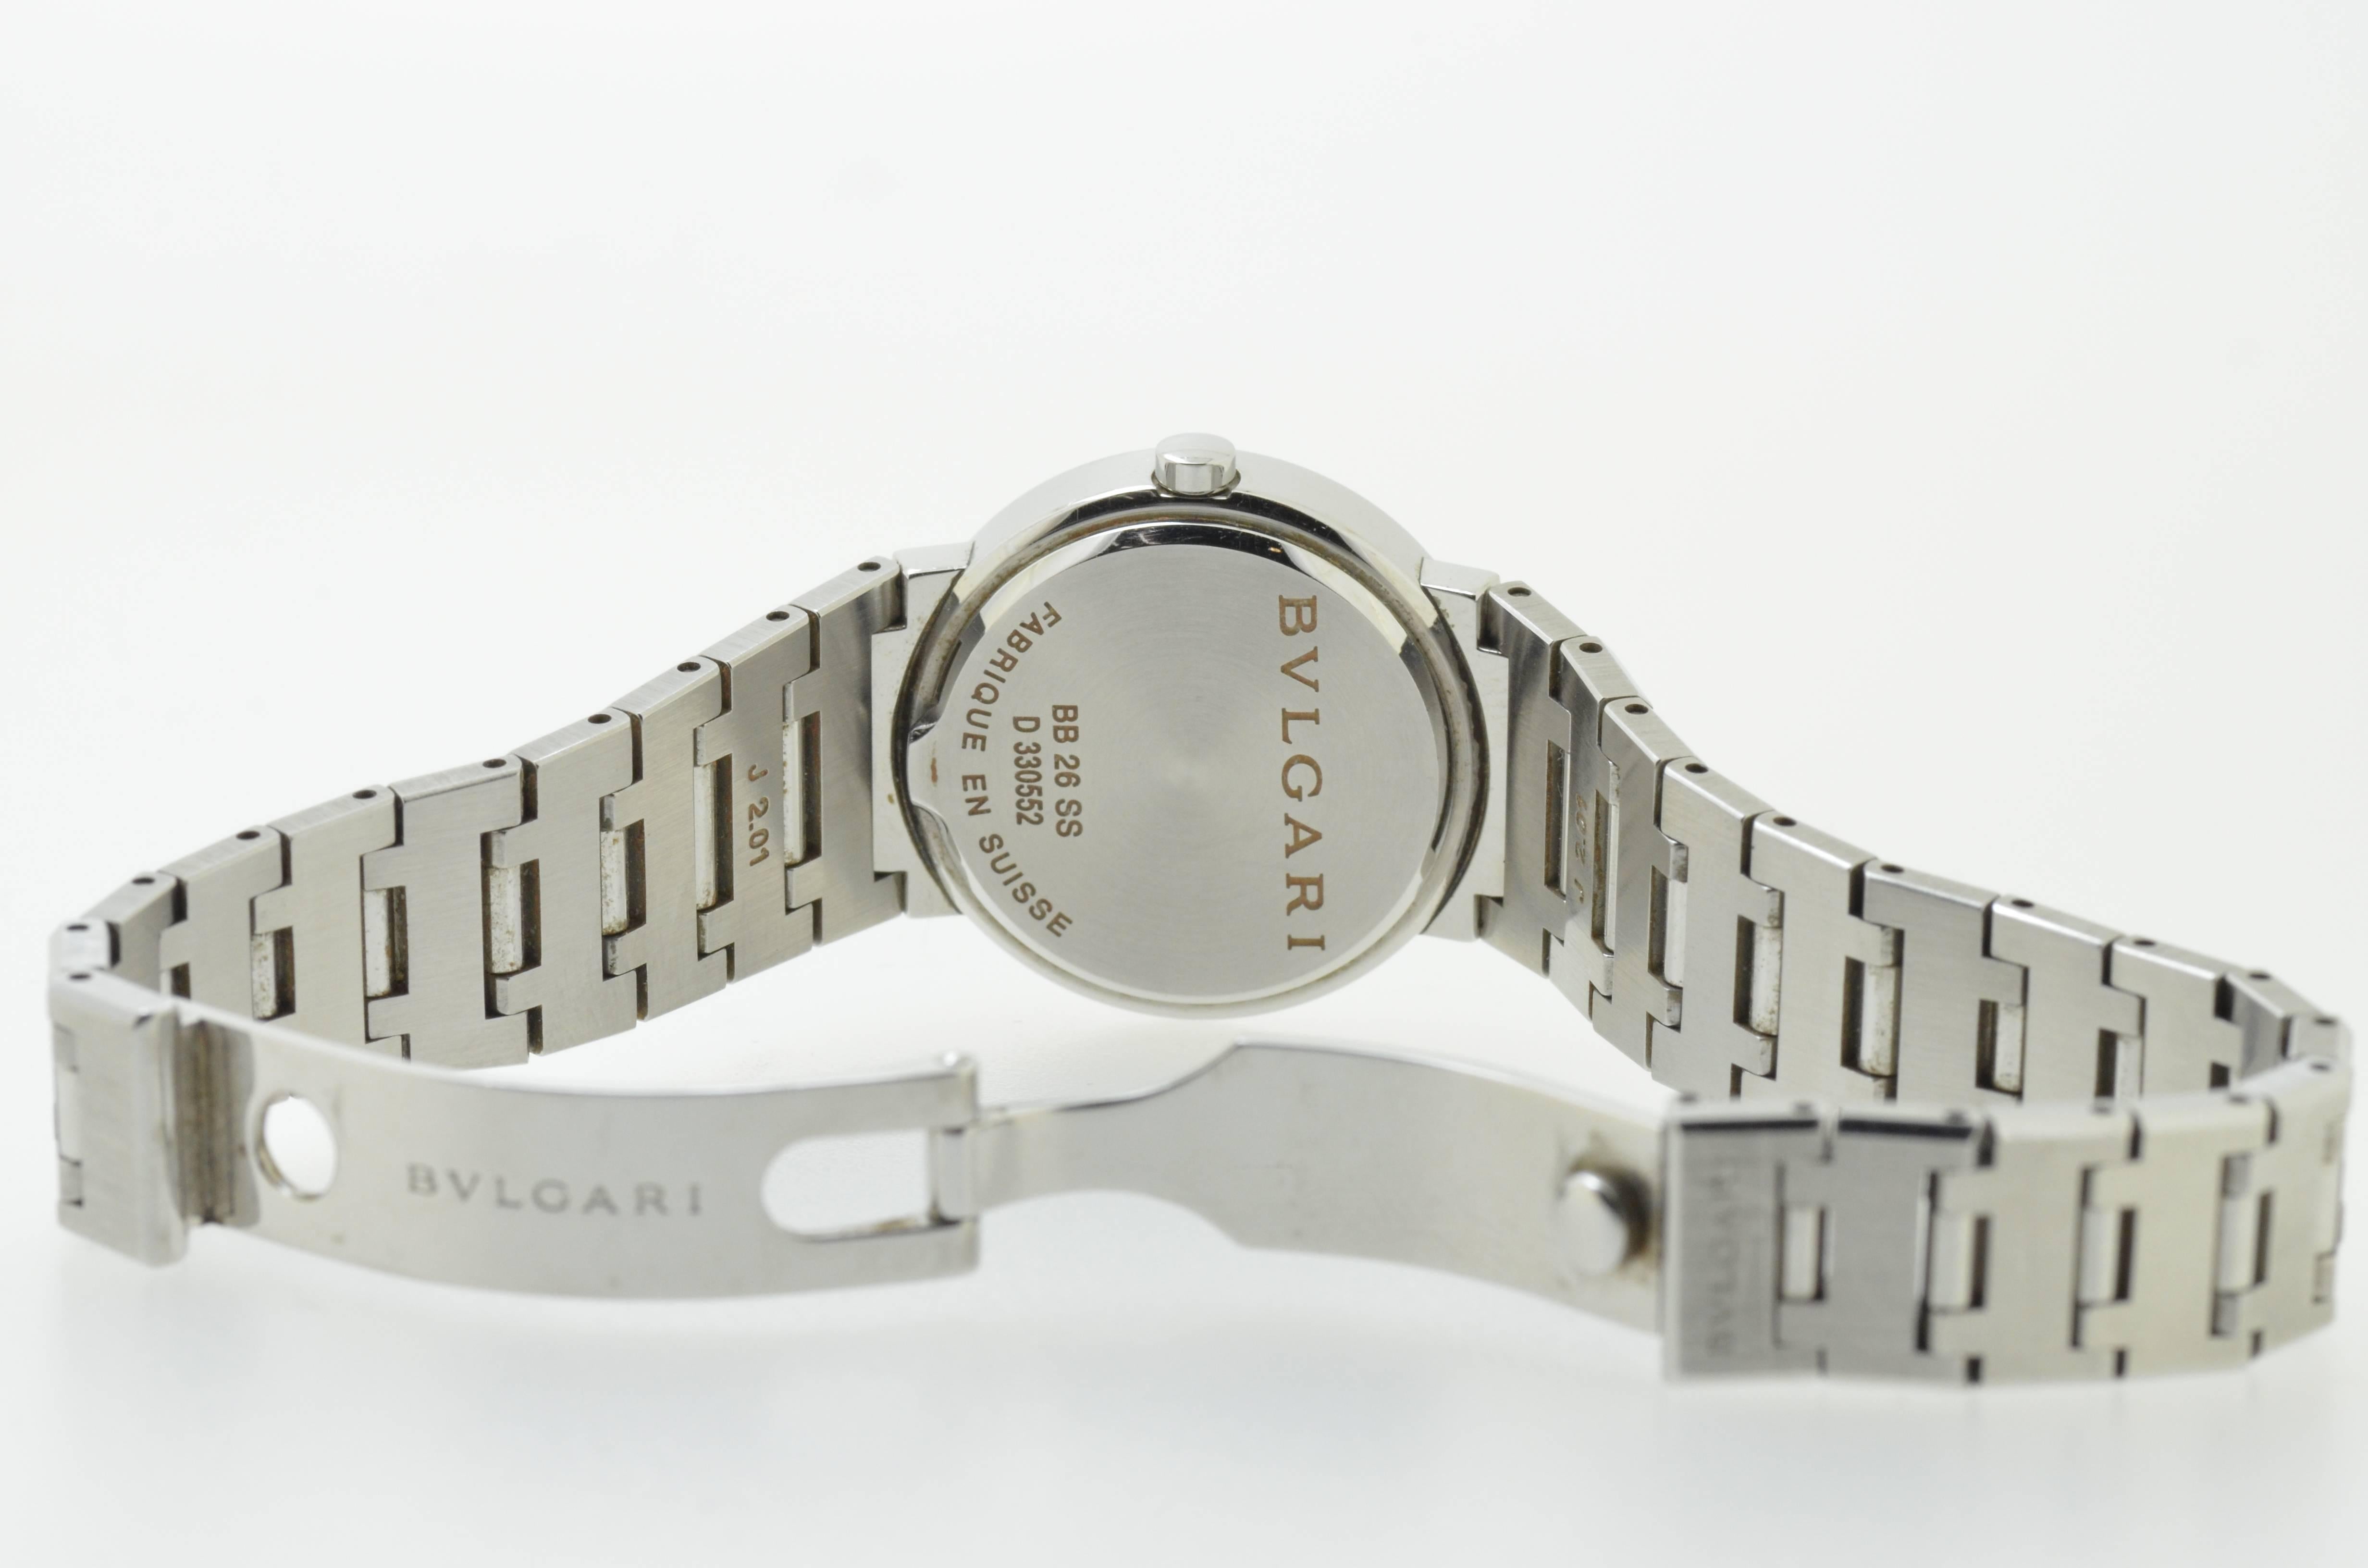 This beautiful BVLGARI ladies wristwatch represents Italian design in combination with Swiss engineering. Both comfortable and stylish the watch itself is waterproof up to 30 meters.

BB 26 SS

Accompanied with:
-Original box & Cover.
-All